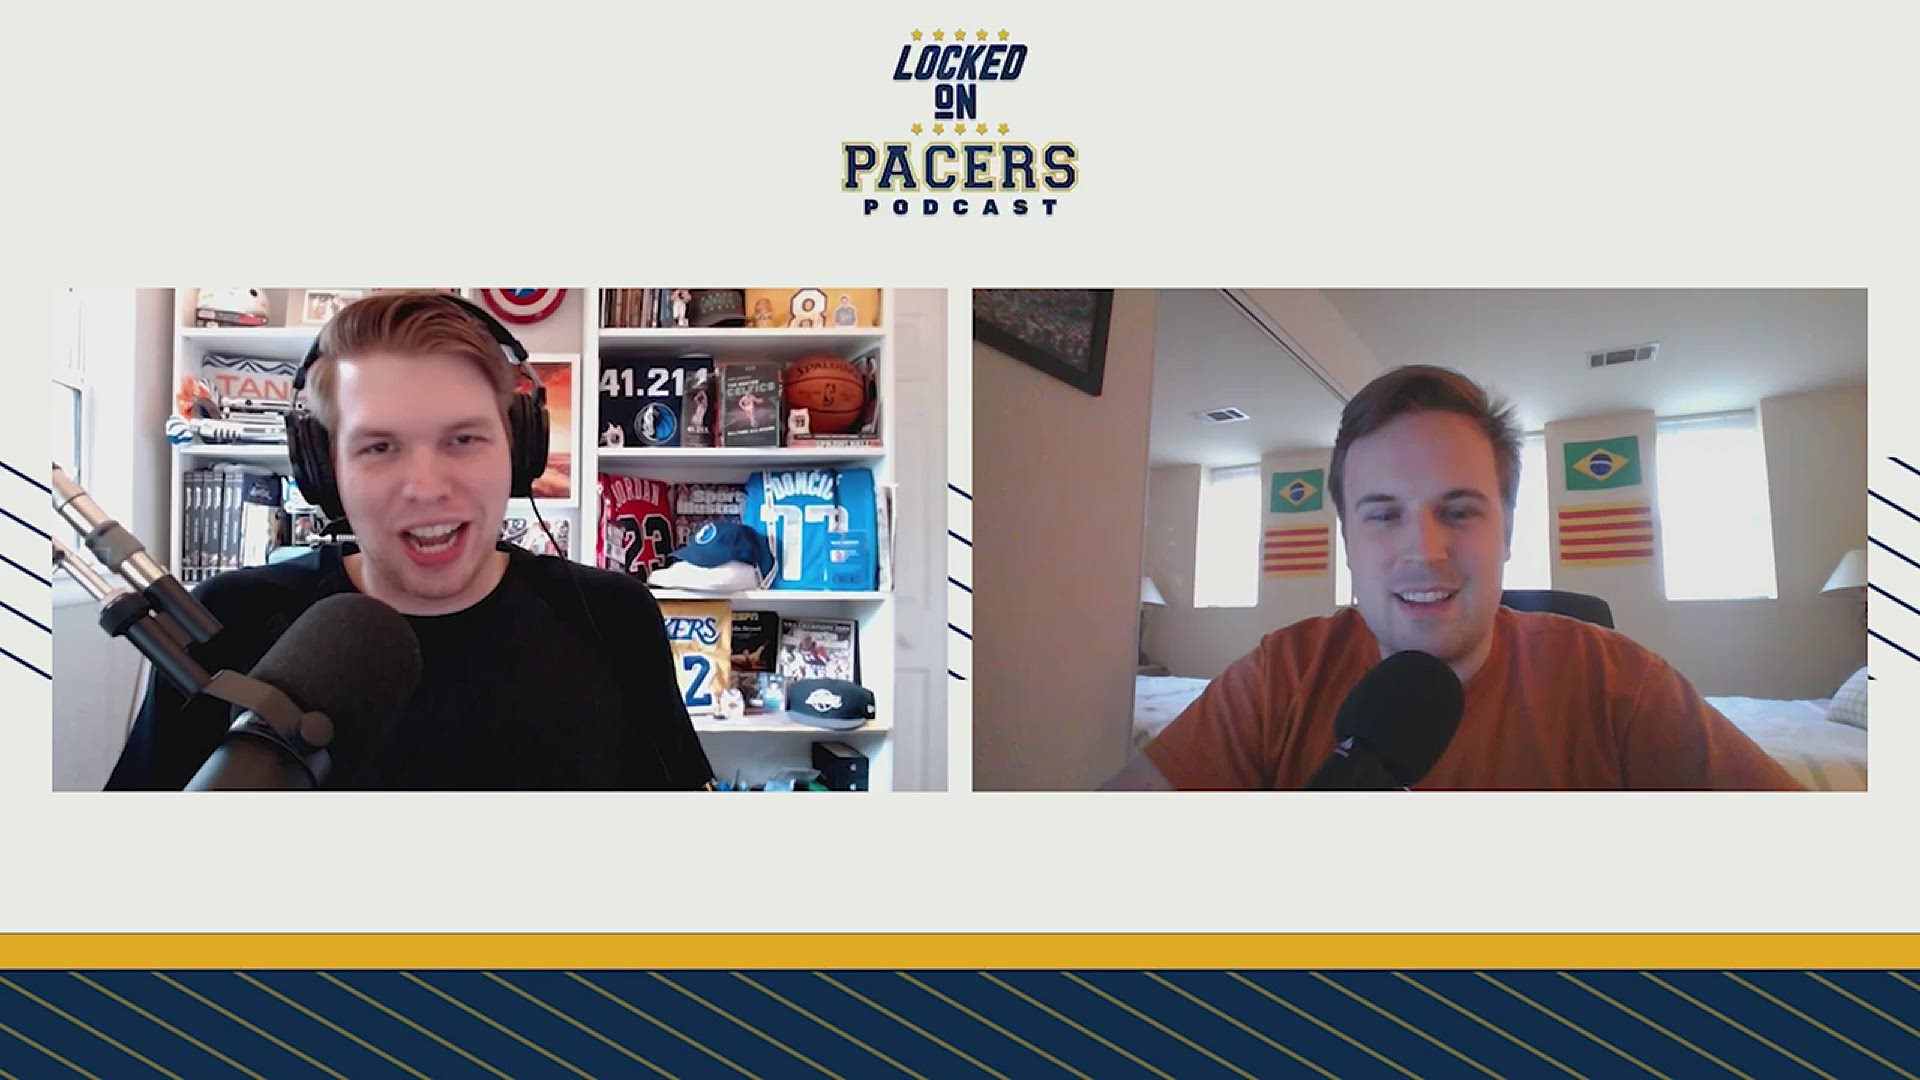 Locked On Pacers host Tony East discusses the Indiana Pacers postseason outlook with Locked On Mavs host Nick Angstadt.